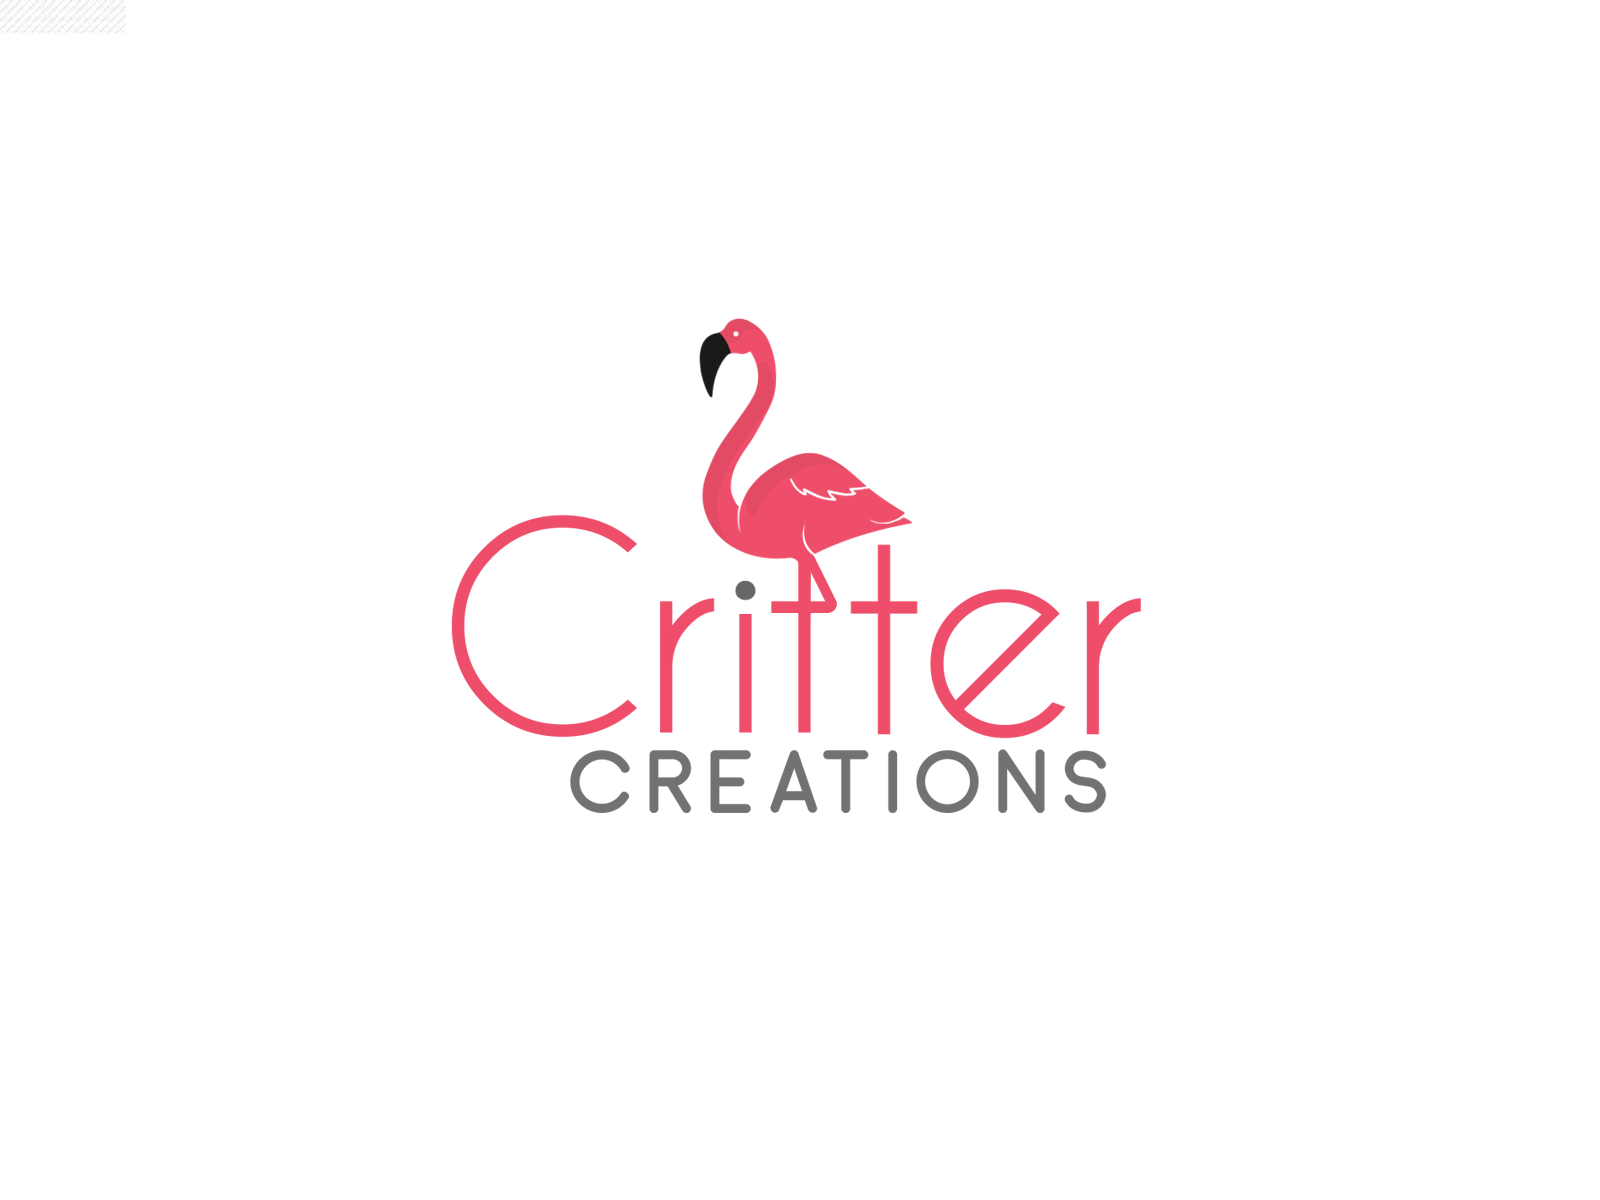 Critter Creations by ESOriginals Logo Identity by HUEDESK STUDIO on ...